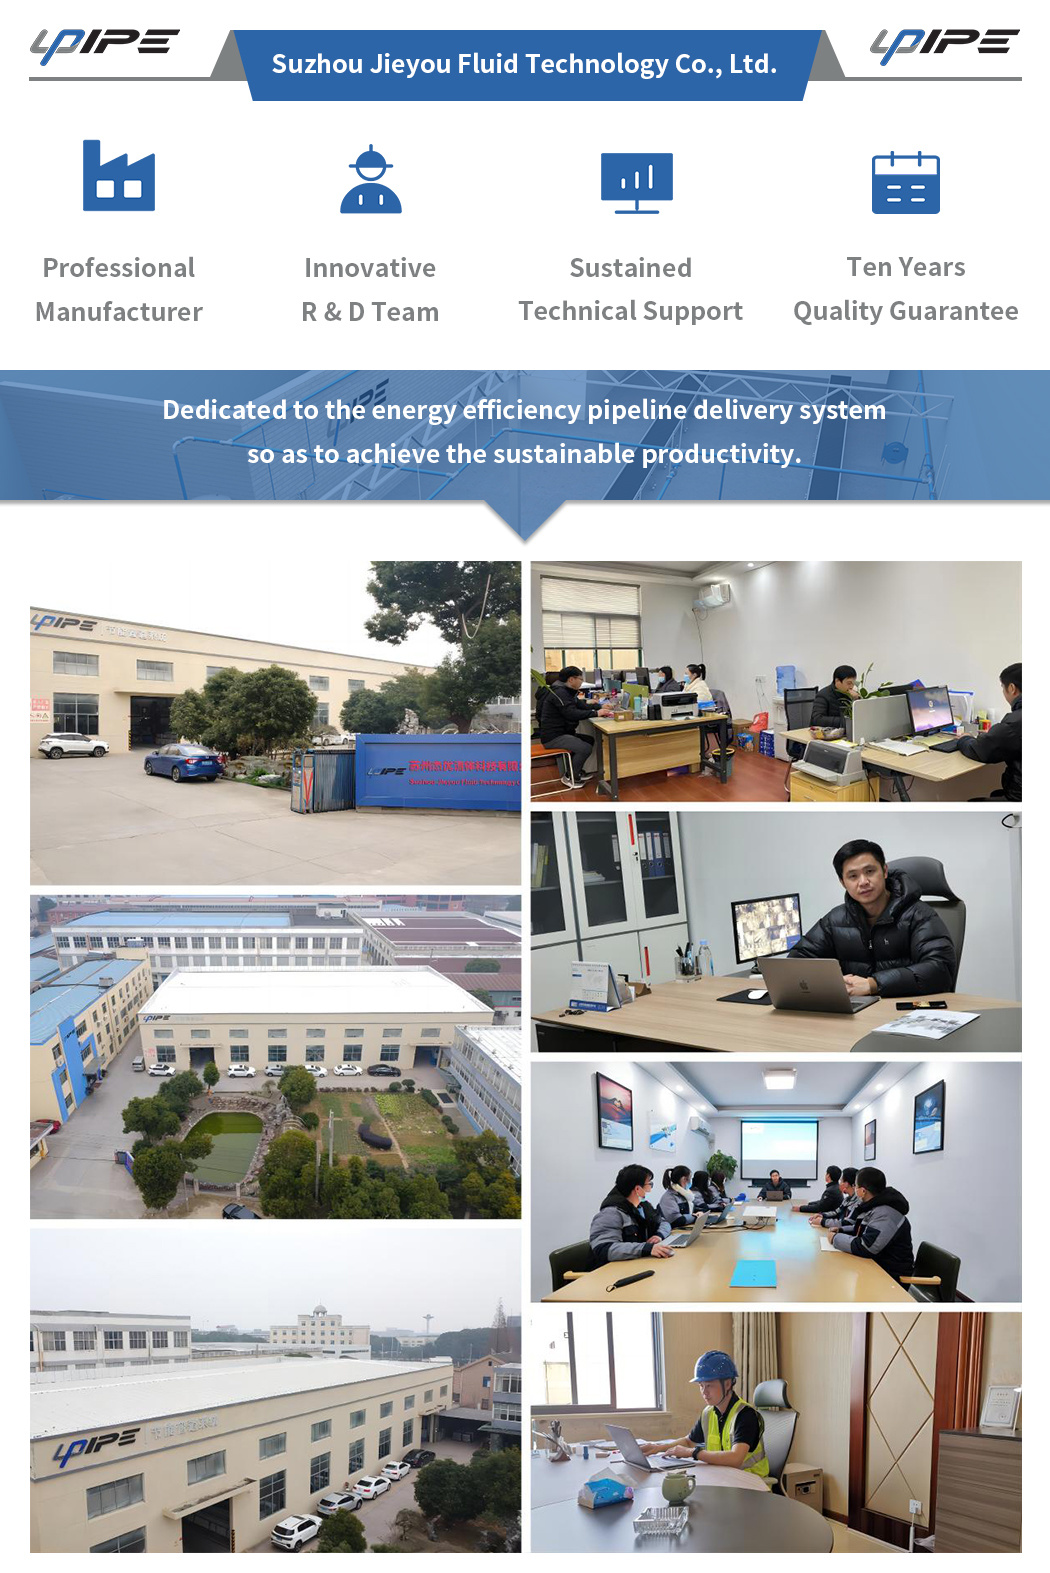 Pictures of Suzhou Jieyou Fluid Technology Co.